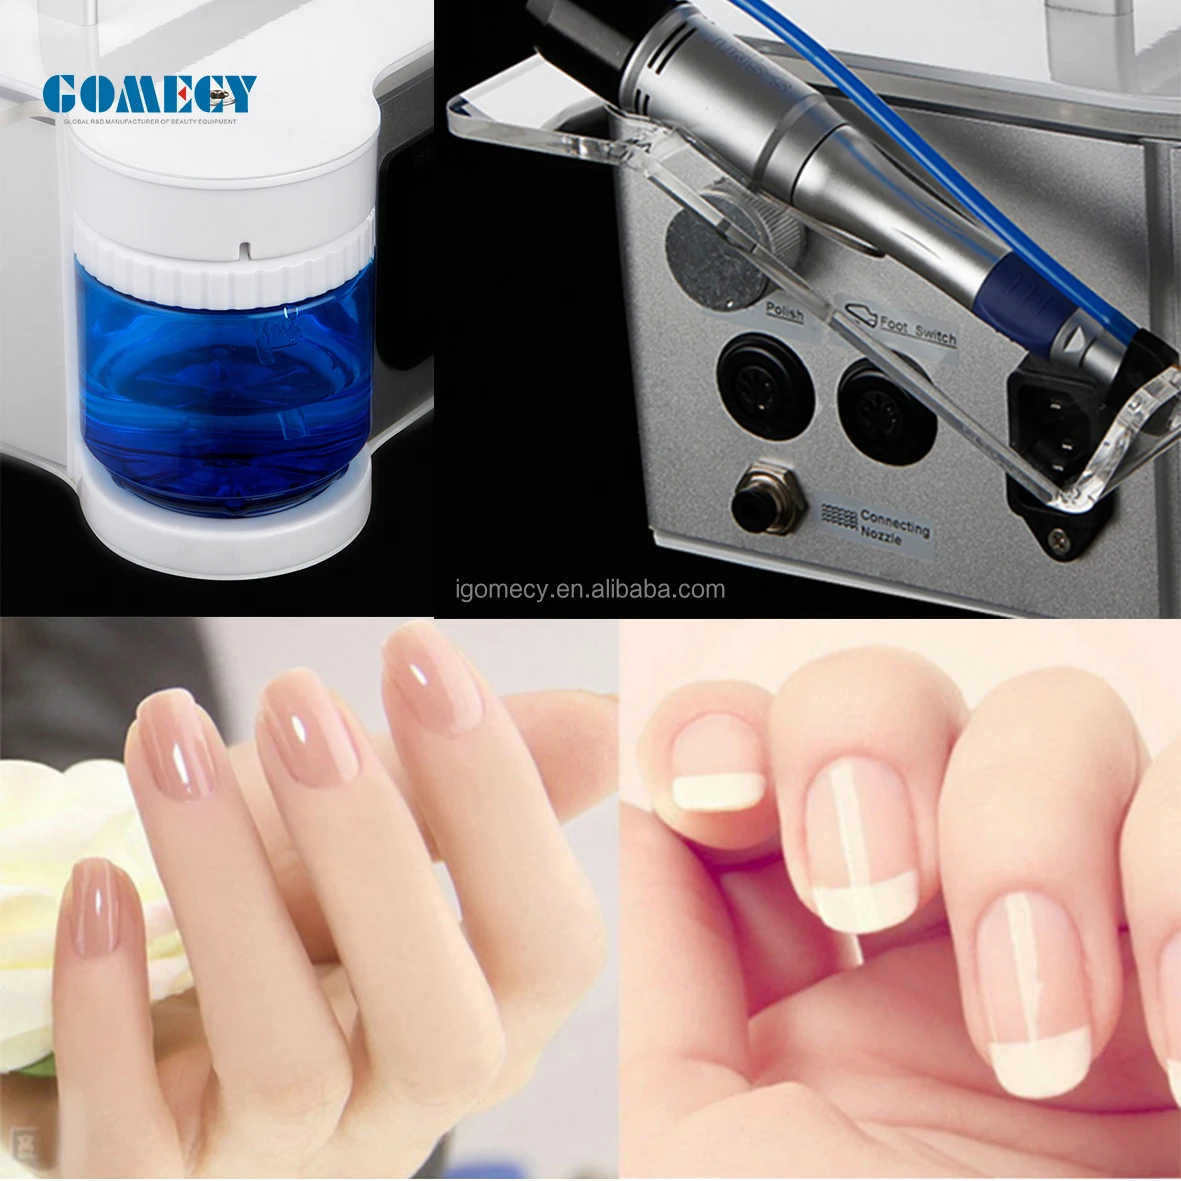 nail polish machine | Fully Automatic Intelligent Digital Nail Printer, 3D Nail  Painting Machine, Can Be Connected By Mobile Phone, DIY Image,White